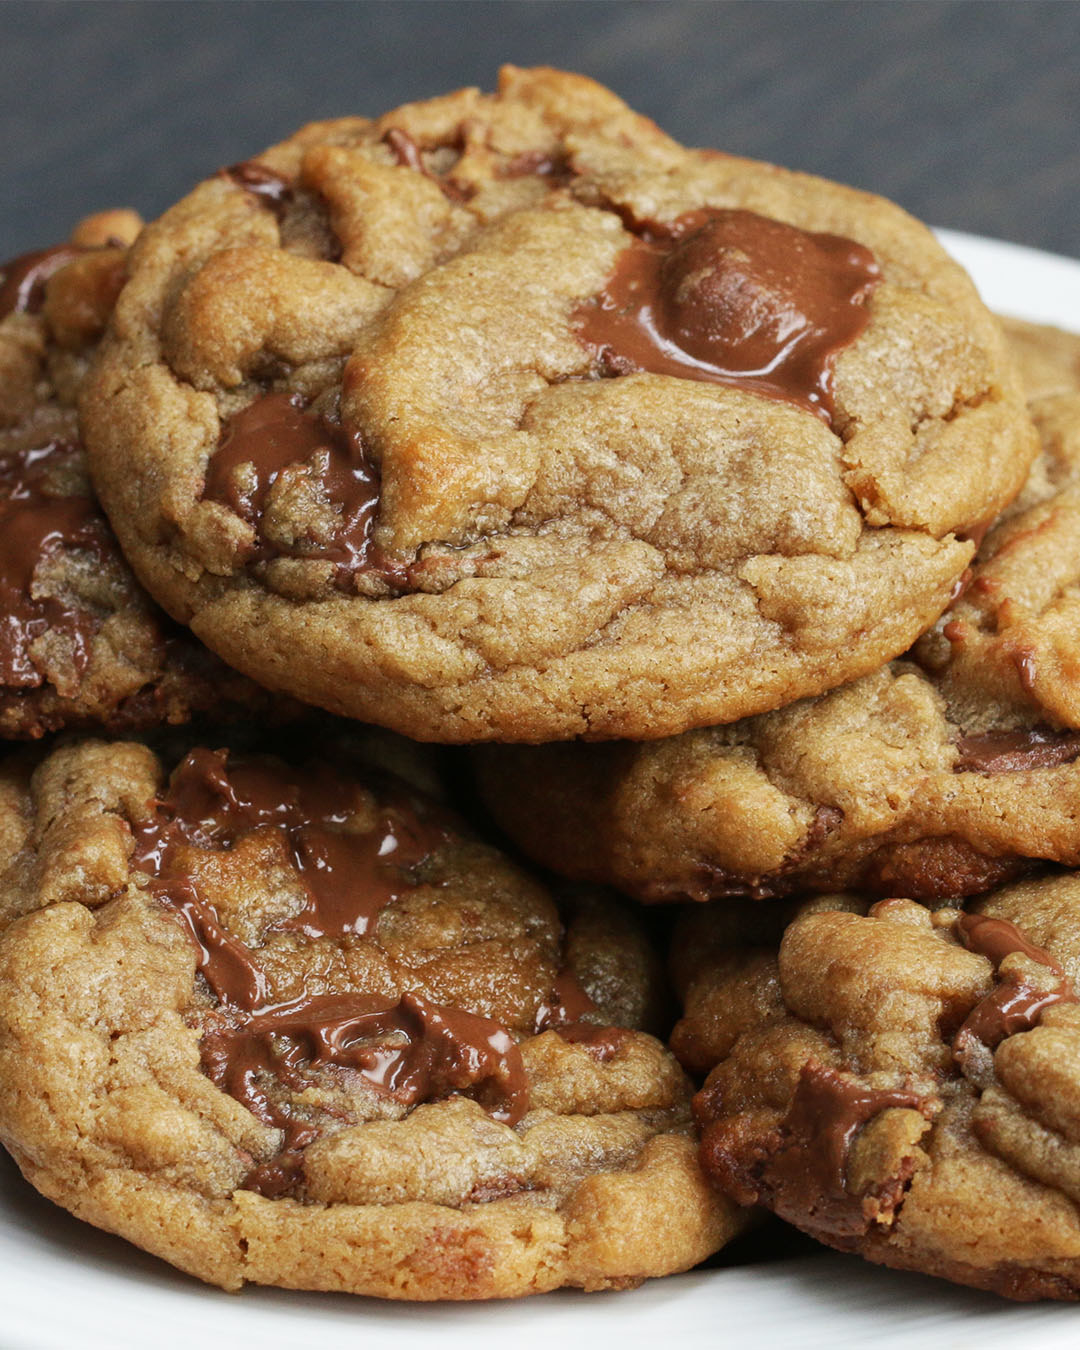 These Peanut Butter Cup Cookies Are Actual Bites Of Heaven